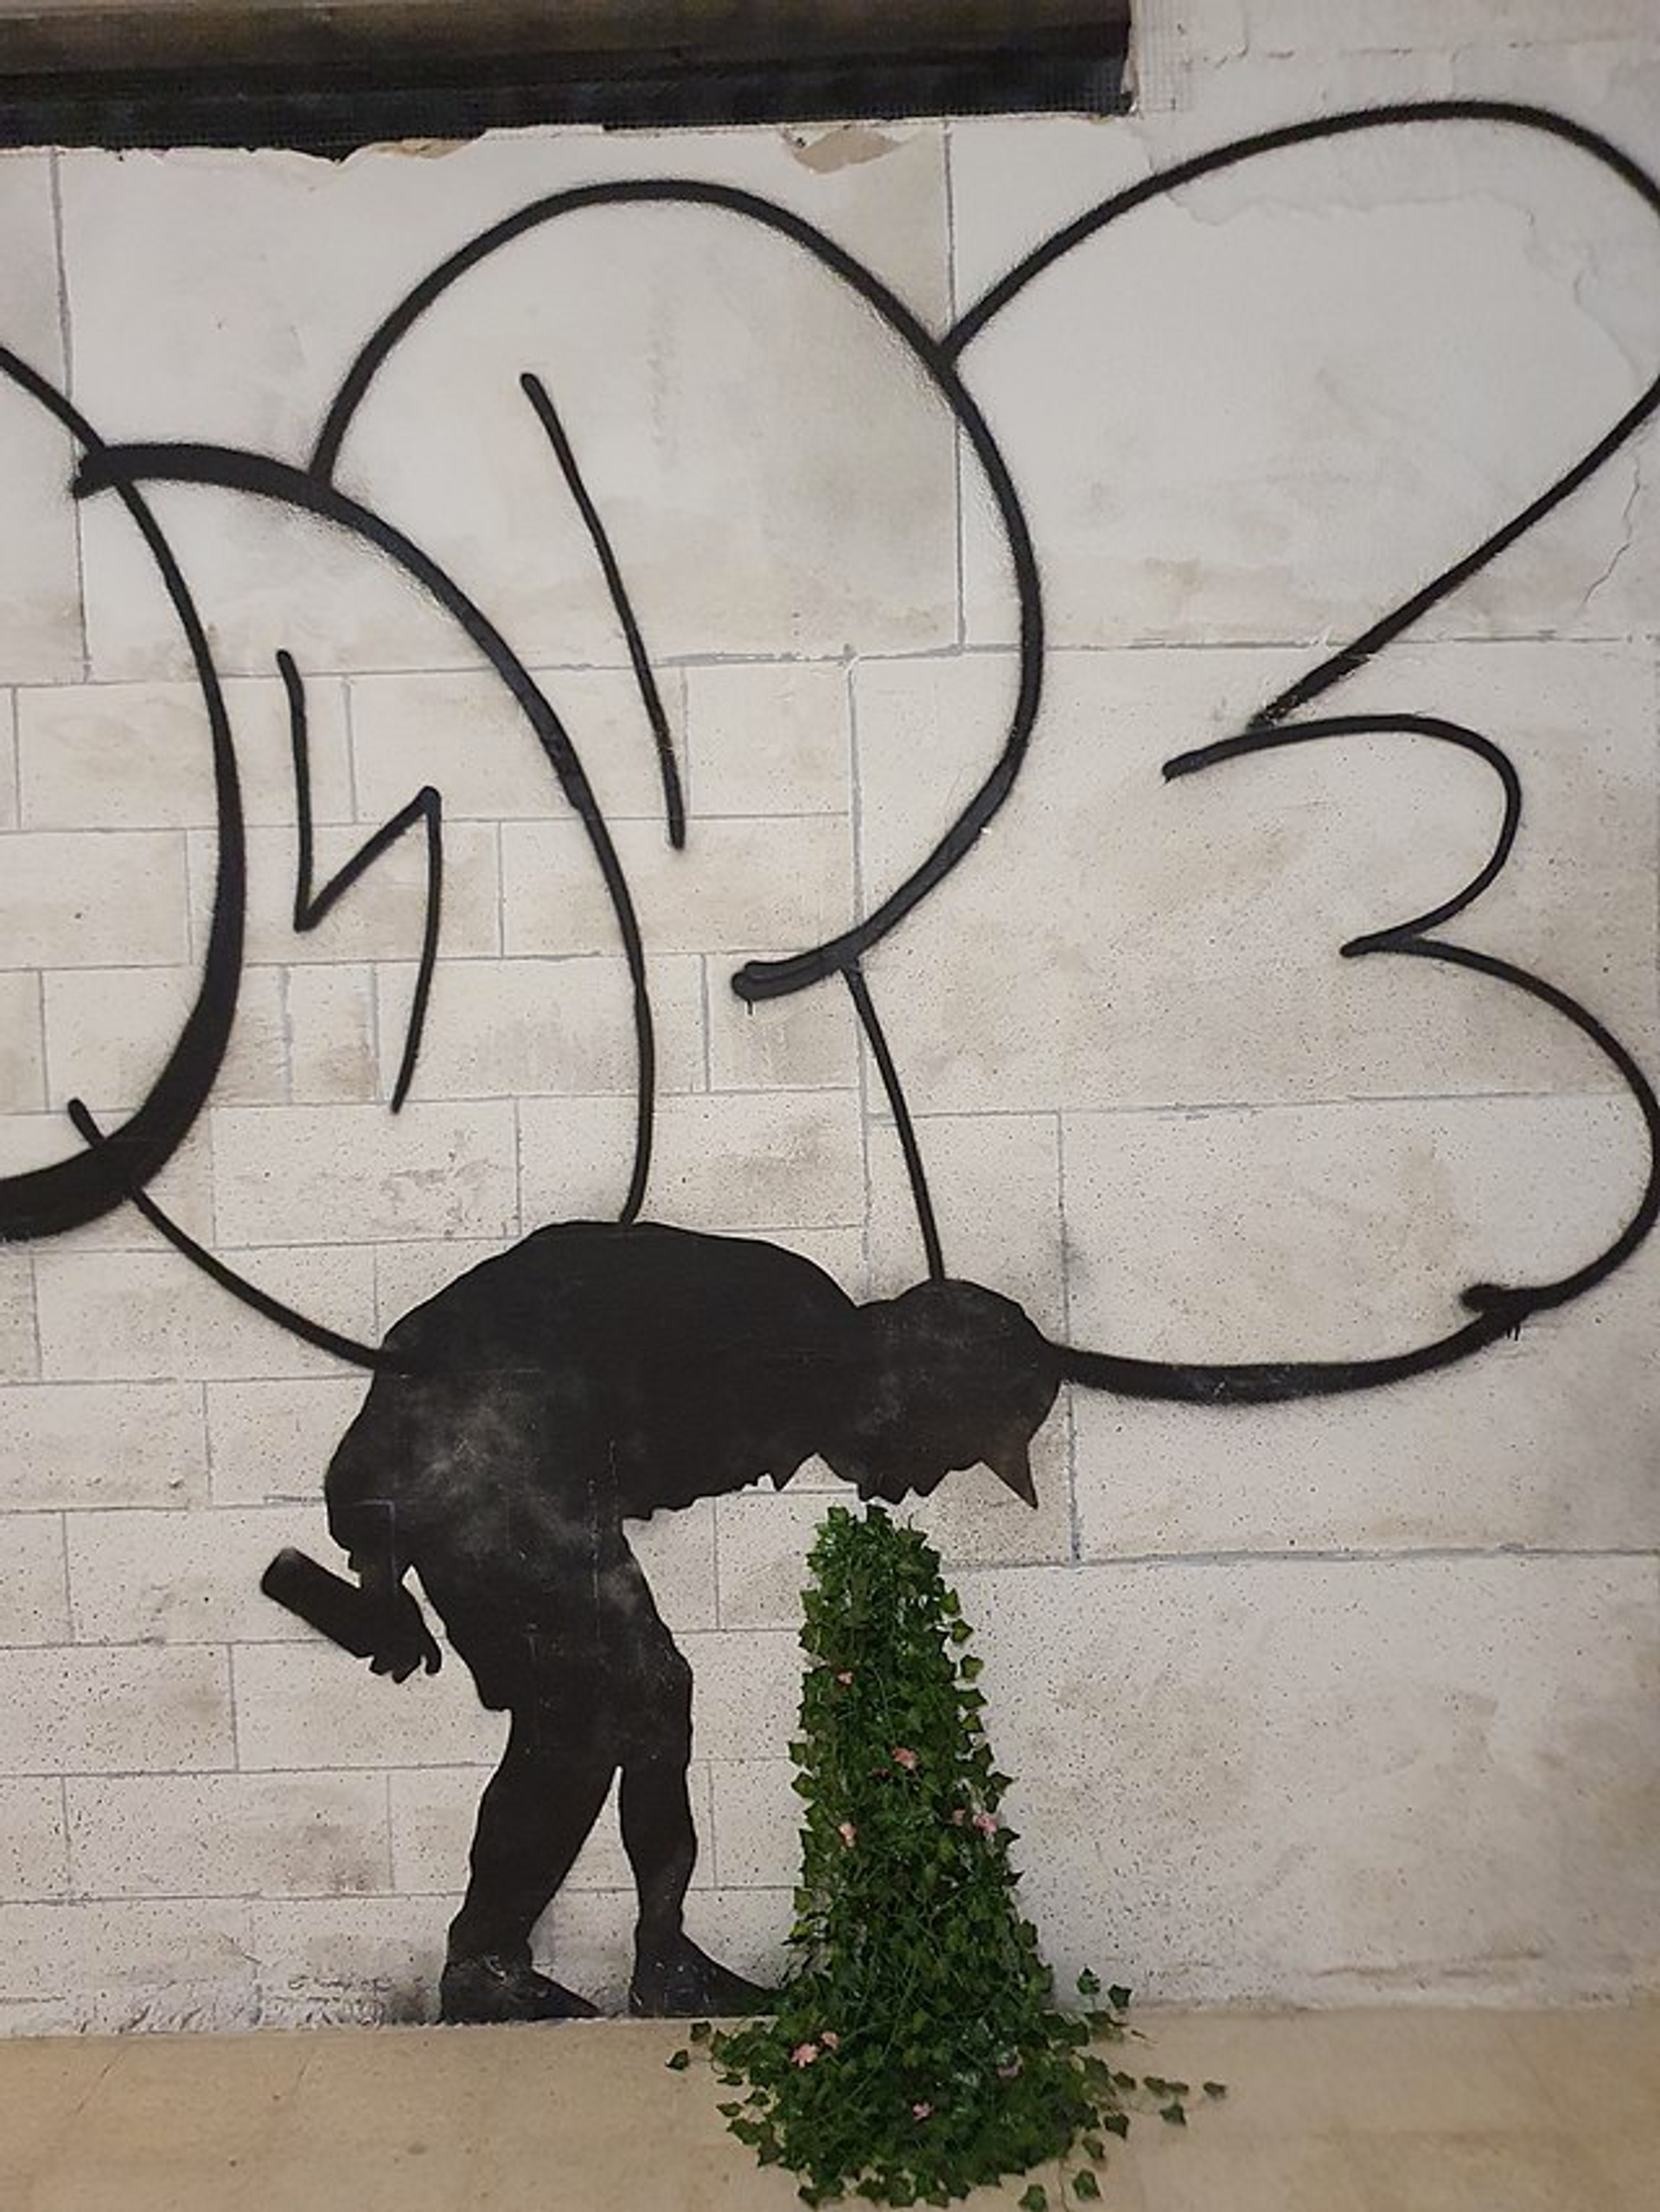 This graffiti shows a male figure bent over, apparently vomiting a bouquet of foliage.